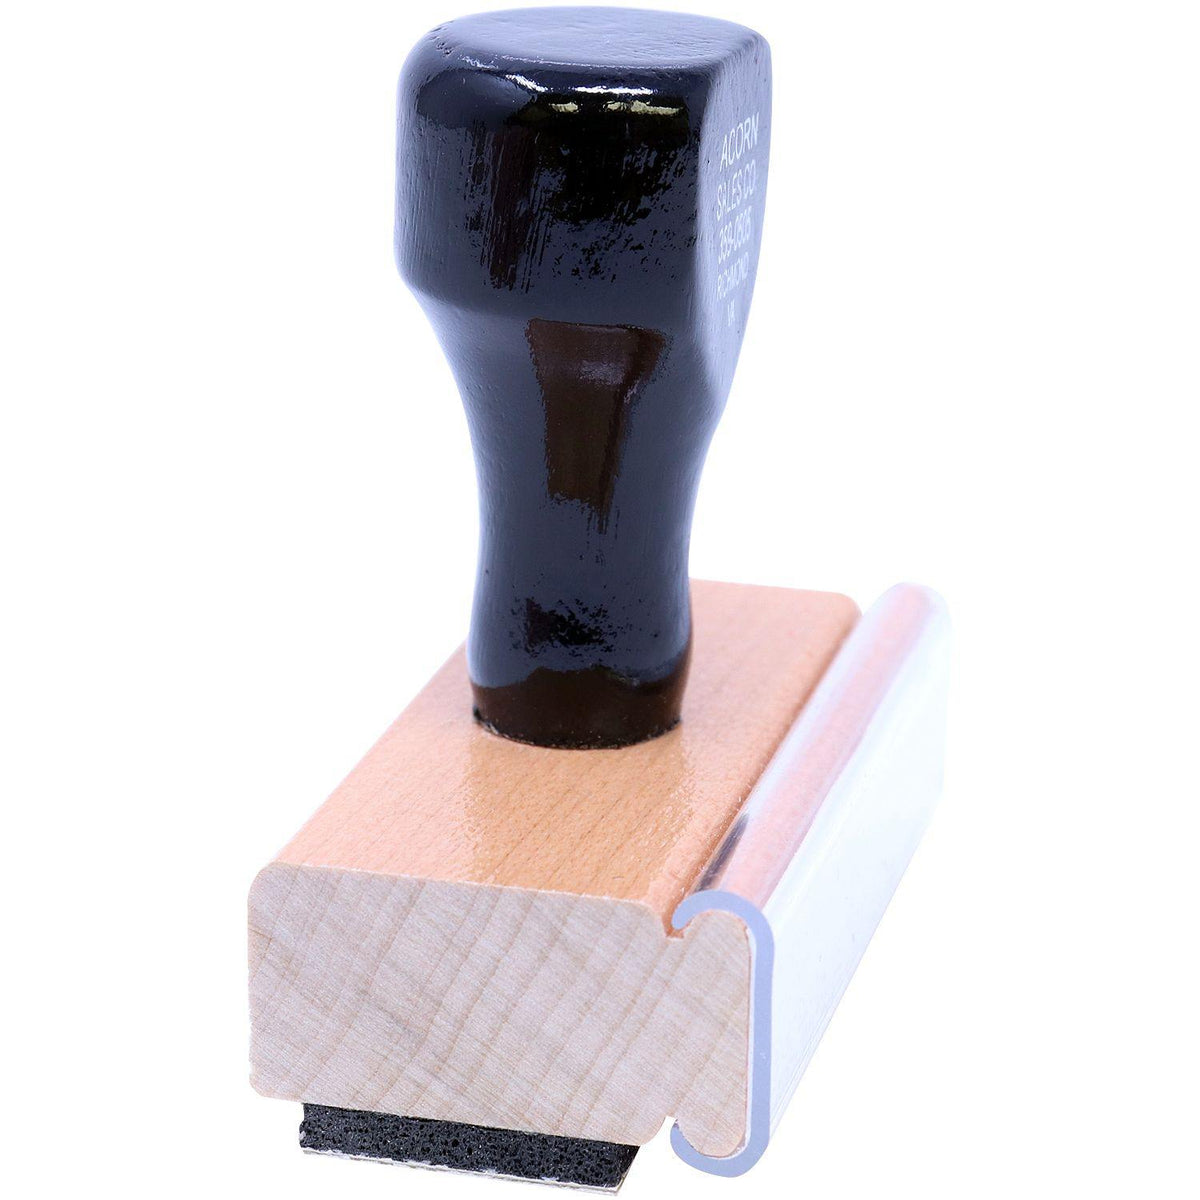 Side View of Vacant Rubber Stamp at an Angle